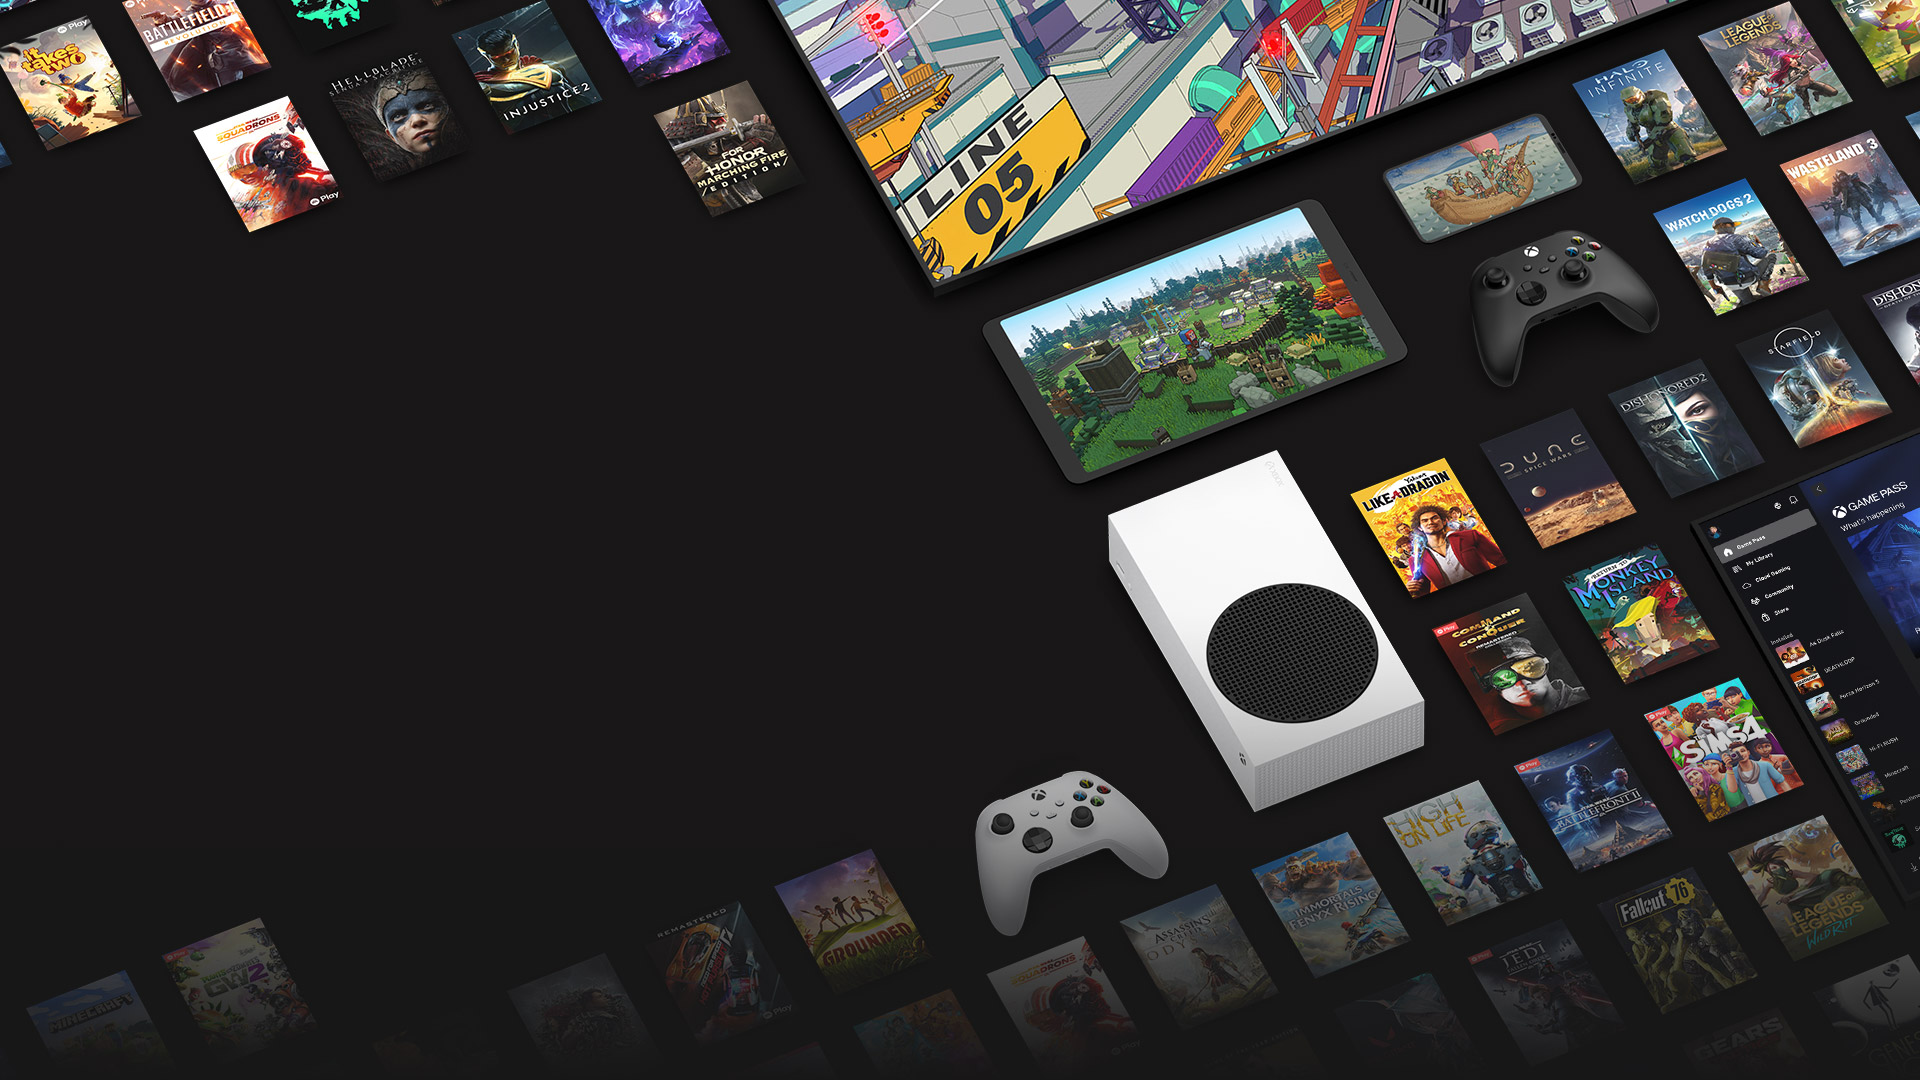 Game art from multiple games available now with Xbox Game Pass Ultimate surround multiple devices, including a console, PC, tablet, and smart TV.